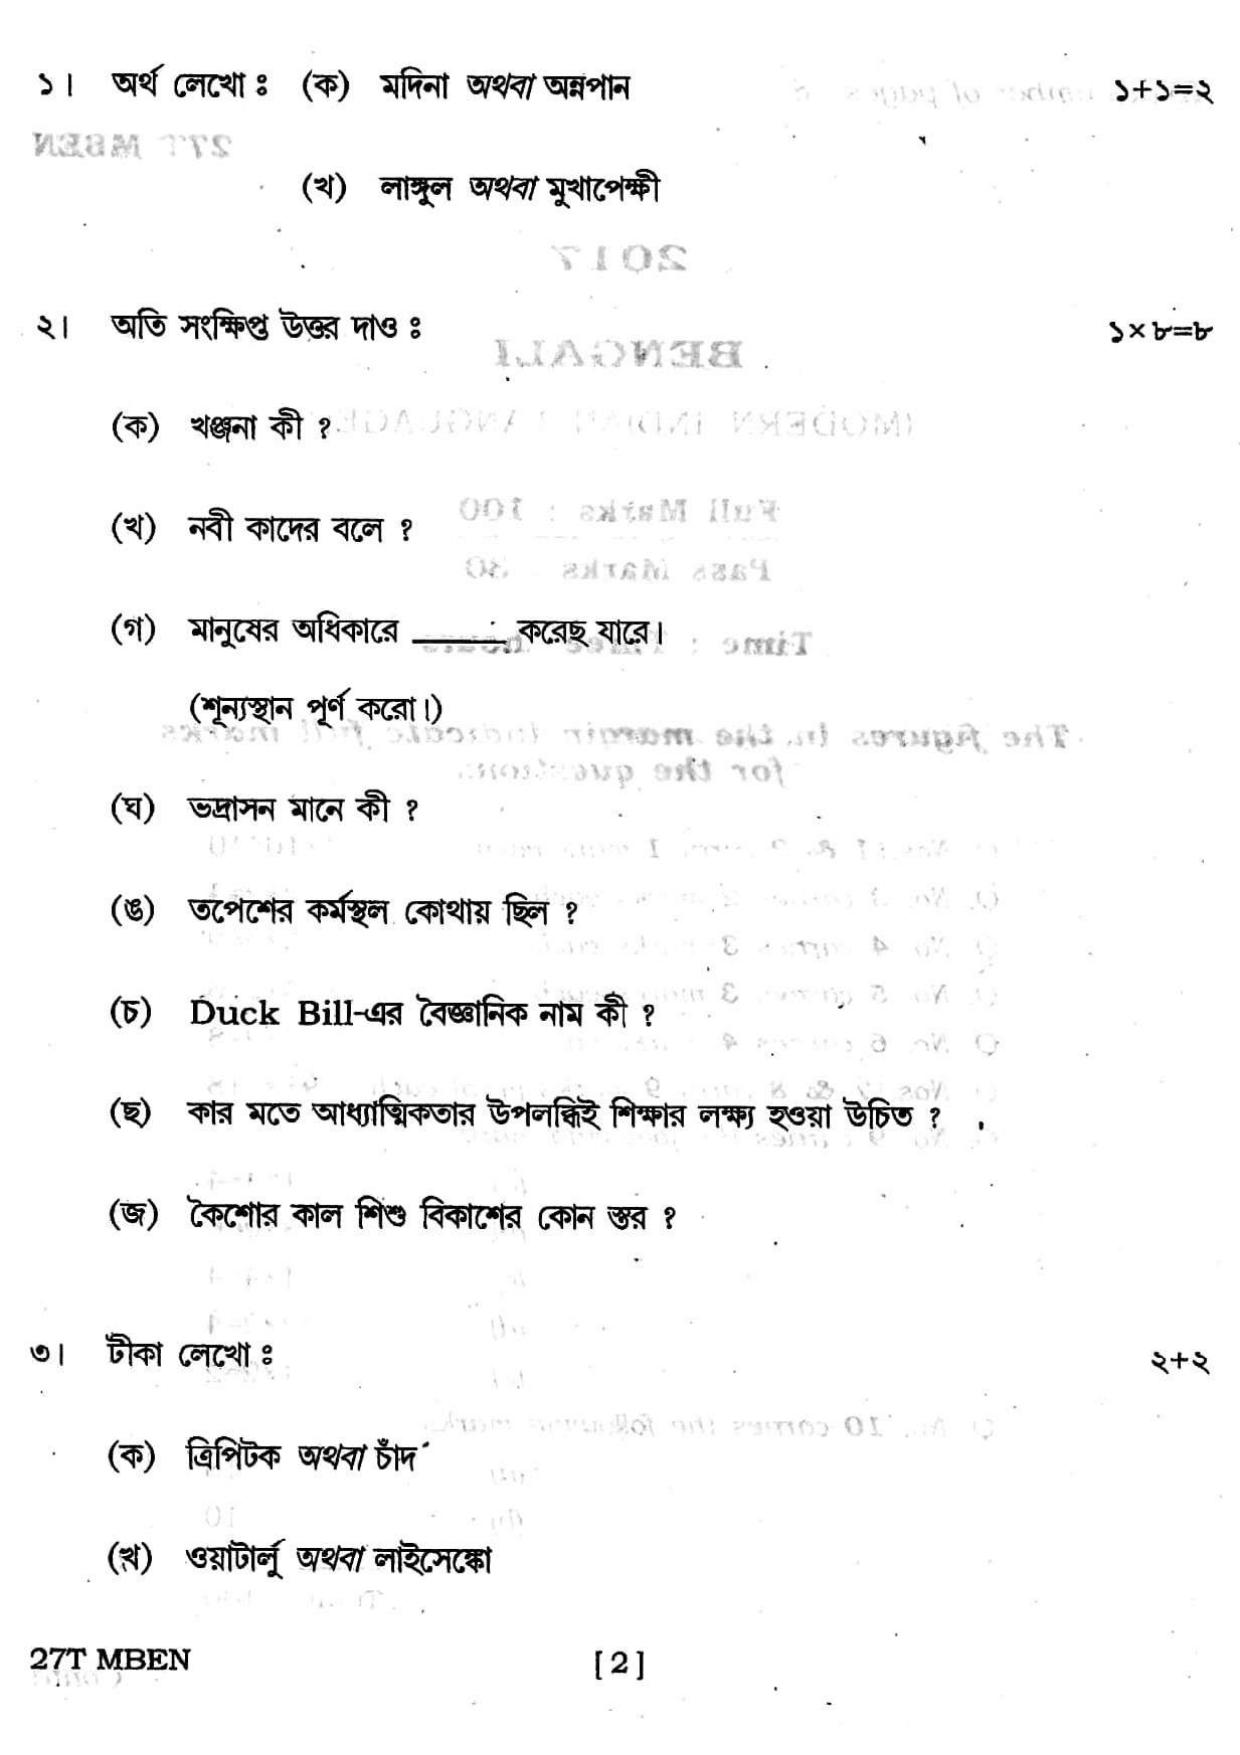 Assam HS 2nd Year Bengali MIL 2017 Question Paper - Page 2